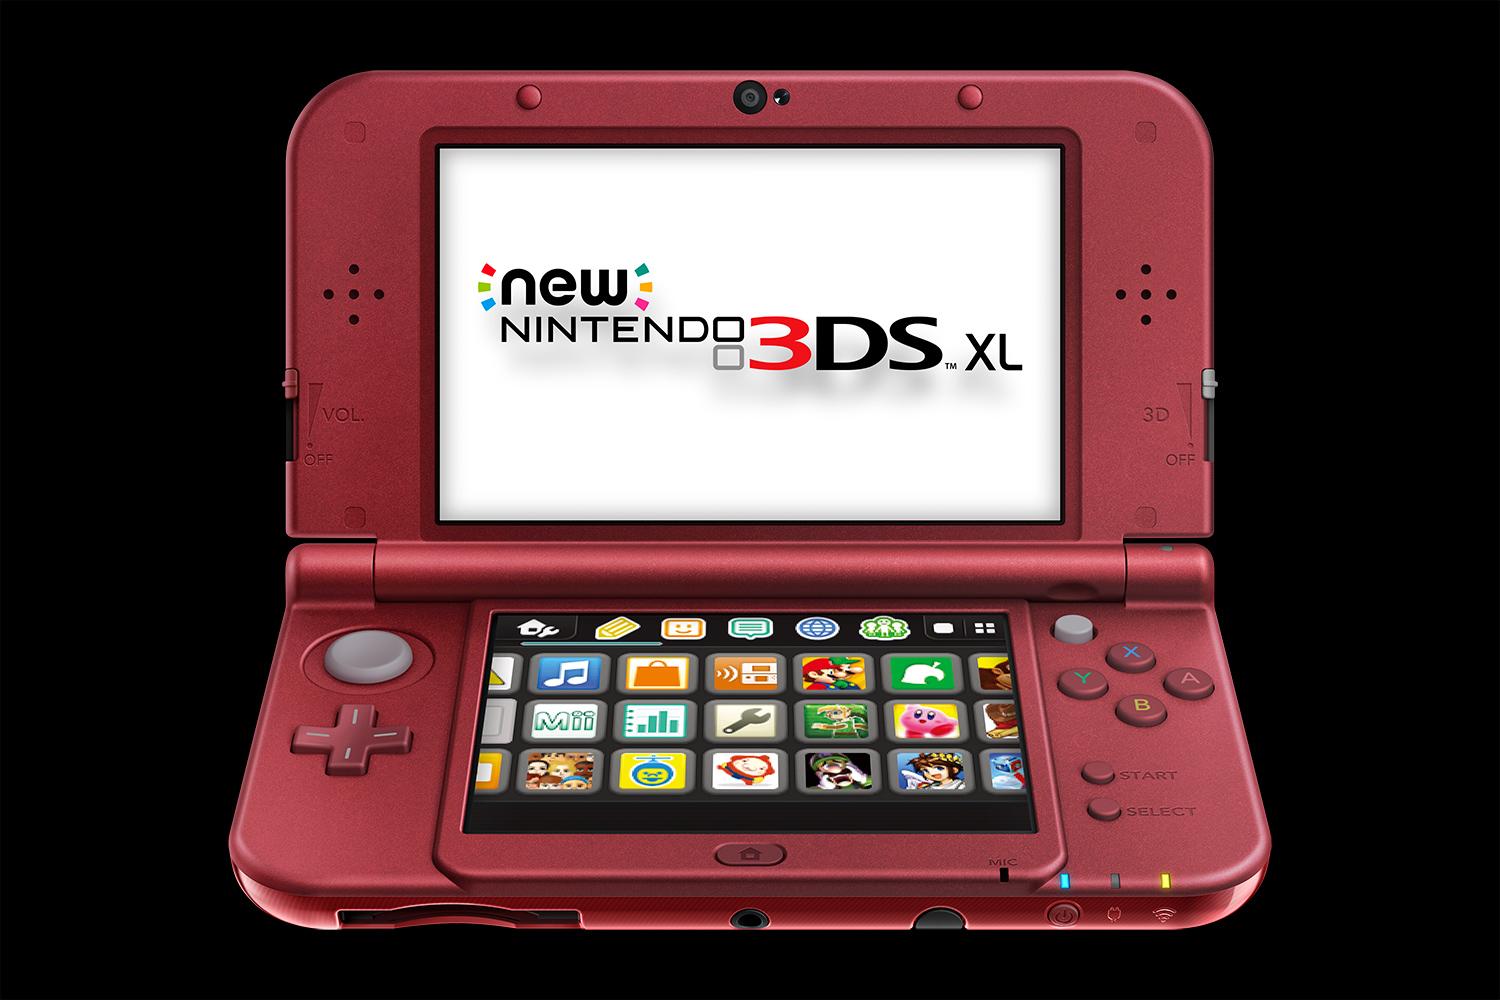 Bestemt Chip Bær New Nintendo 3DS XL review | Handheld gaming console | Digital Trends